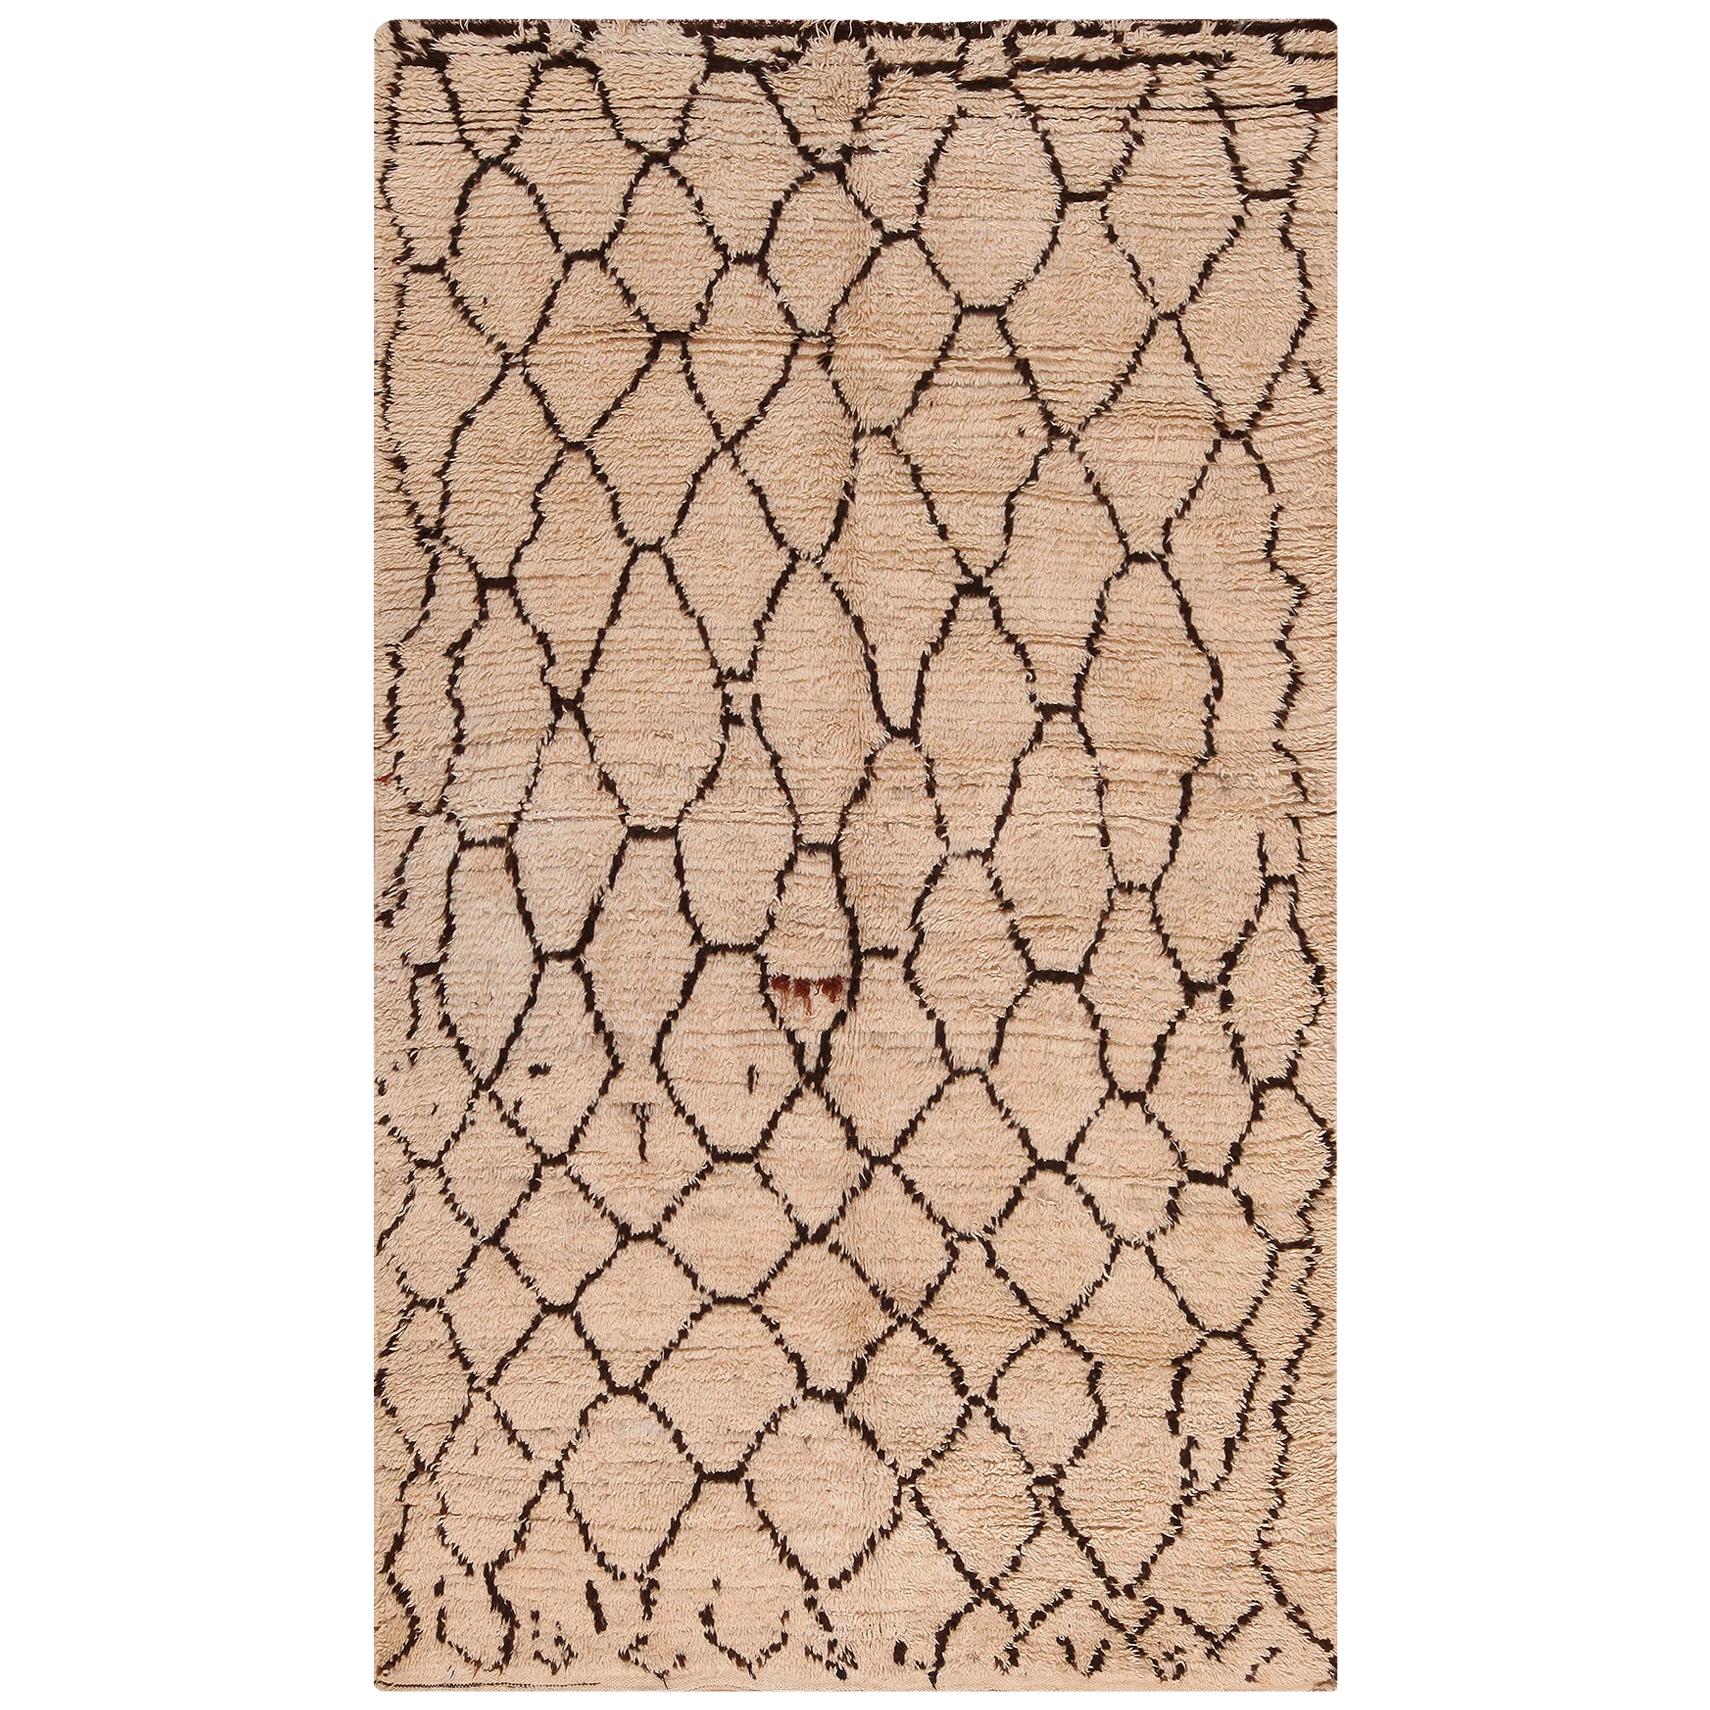 Nazmiyal Collection Vintage Berber Moroccan Rug. Size: 5 ft. 1 in x 8 ft. 7 in